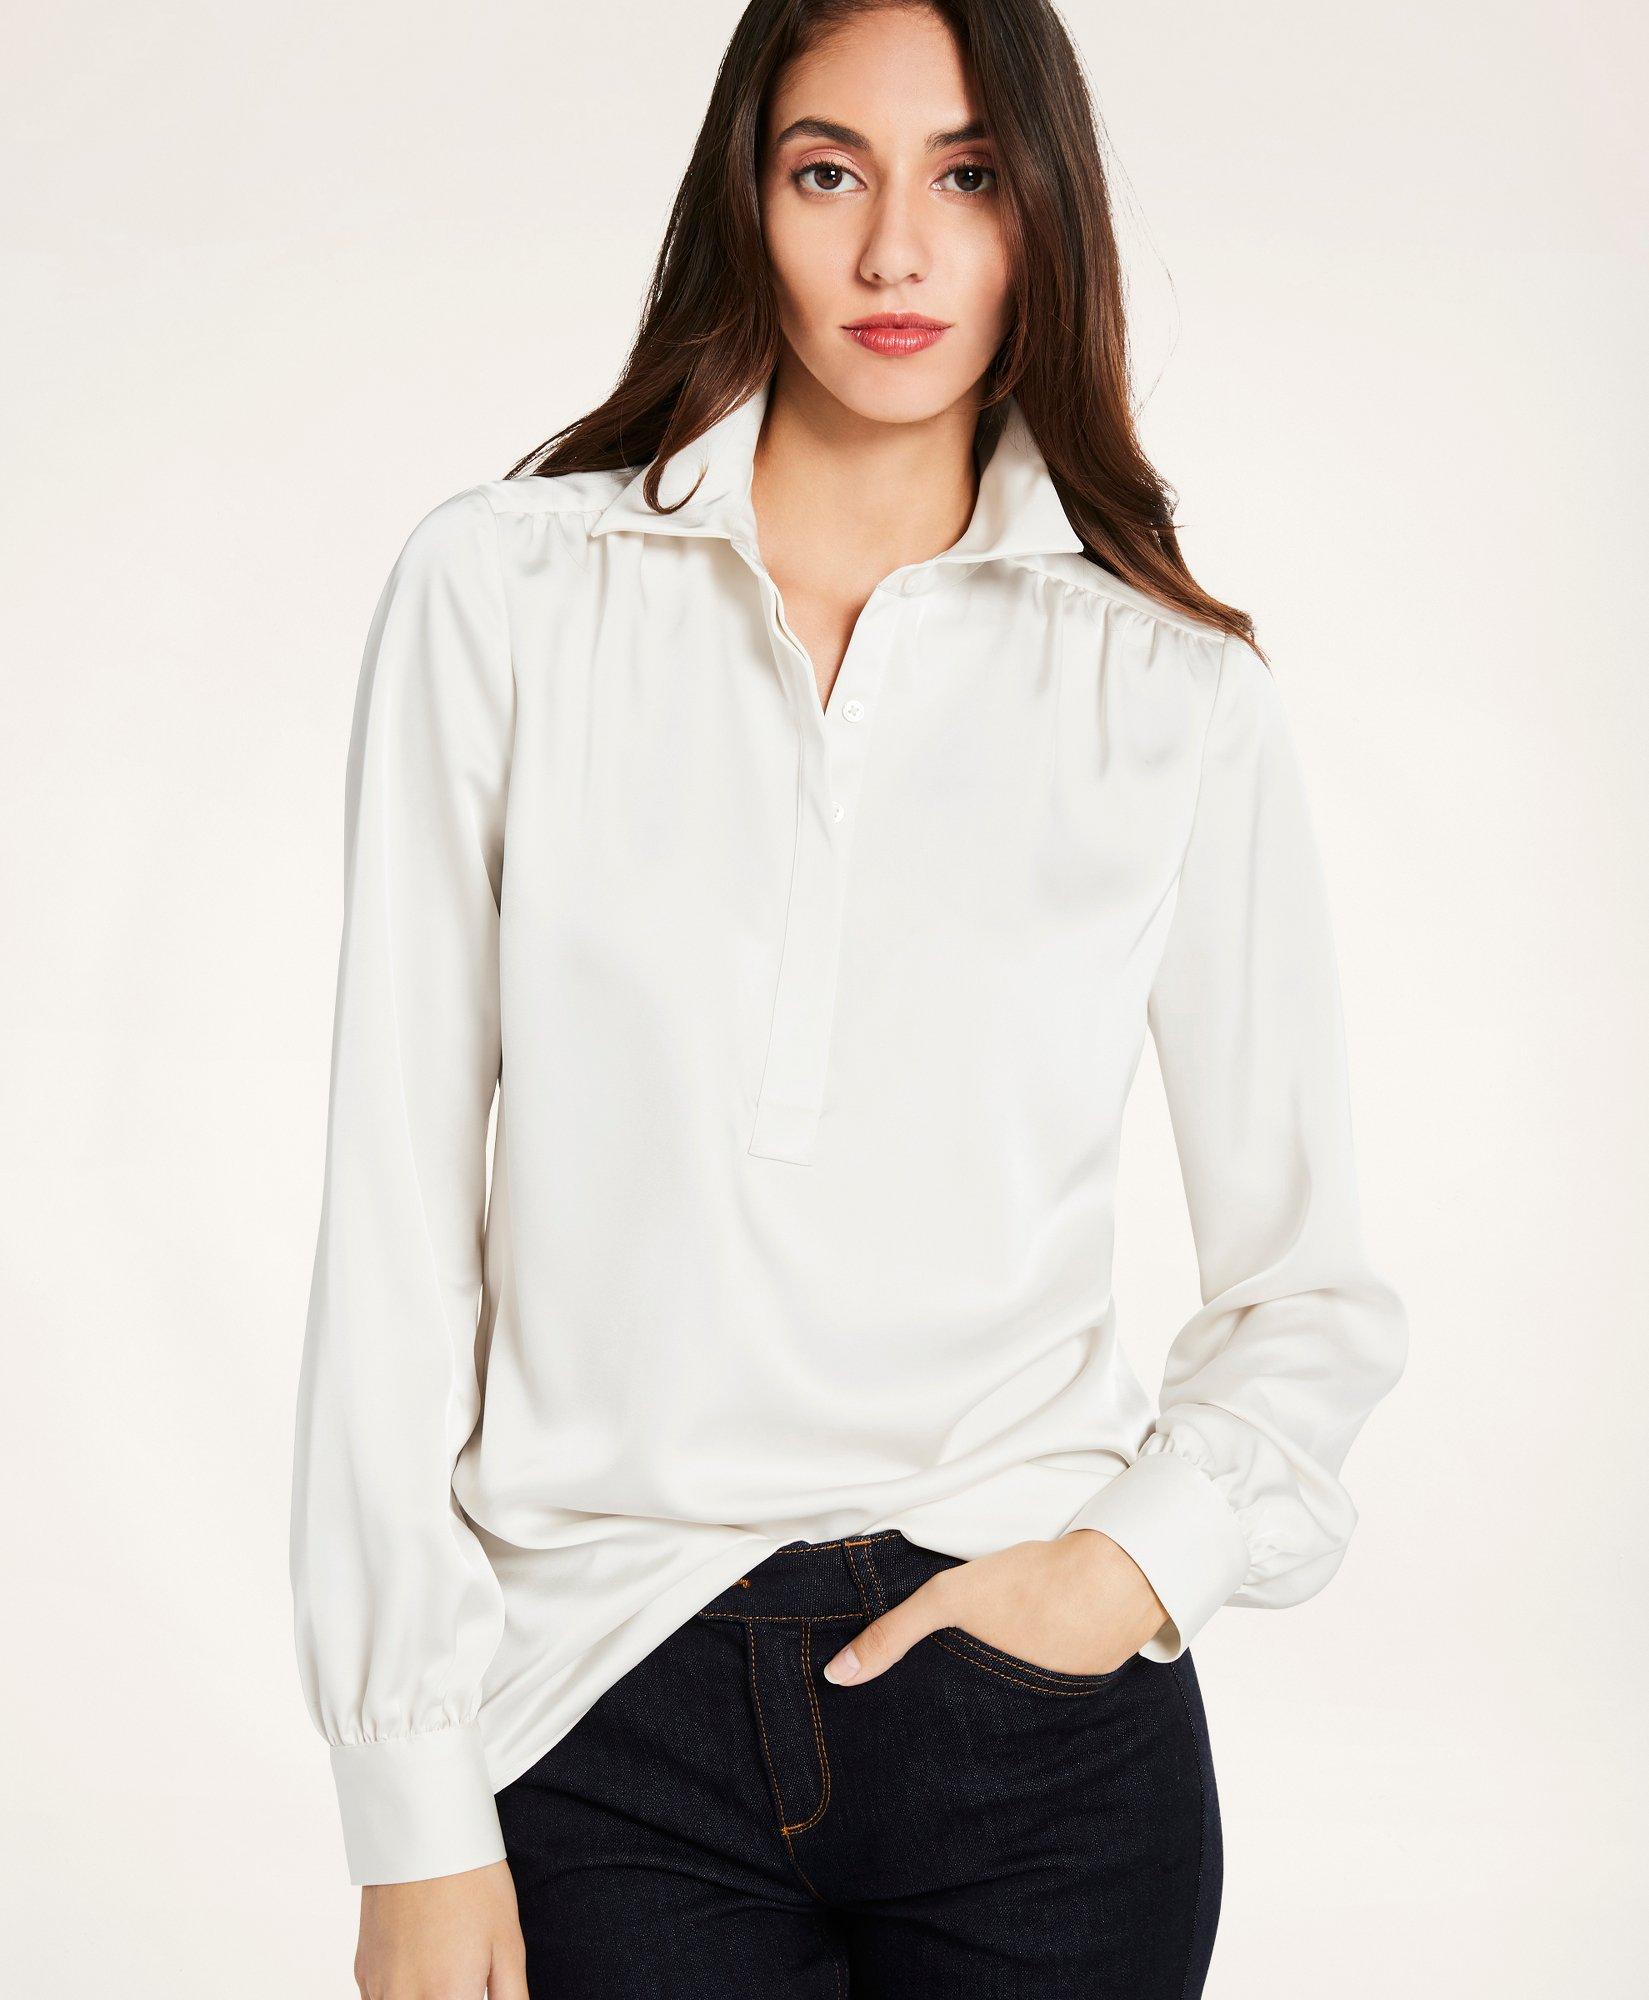 Brooks Brothers Women's Full-Button Satin Blouse, Product